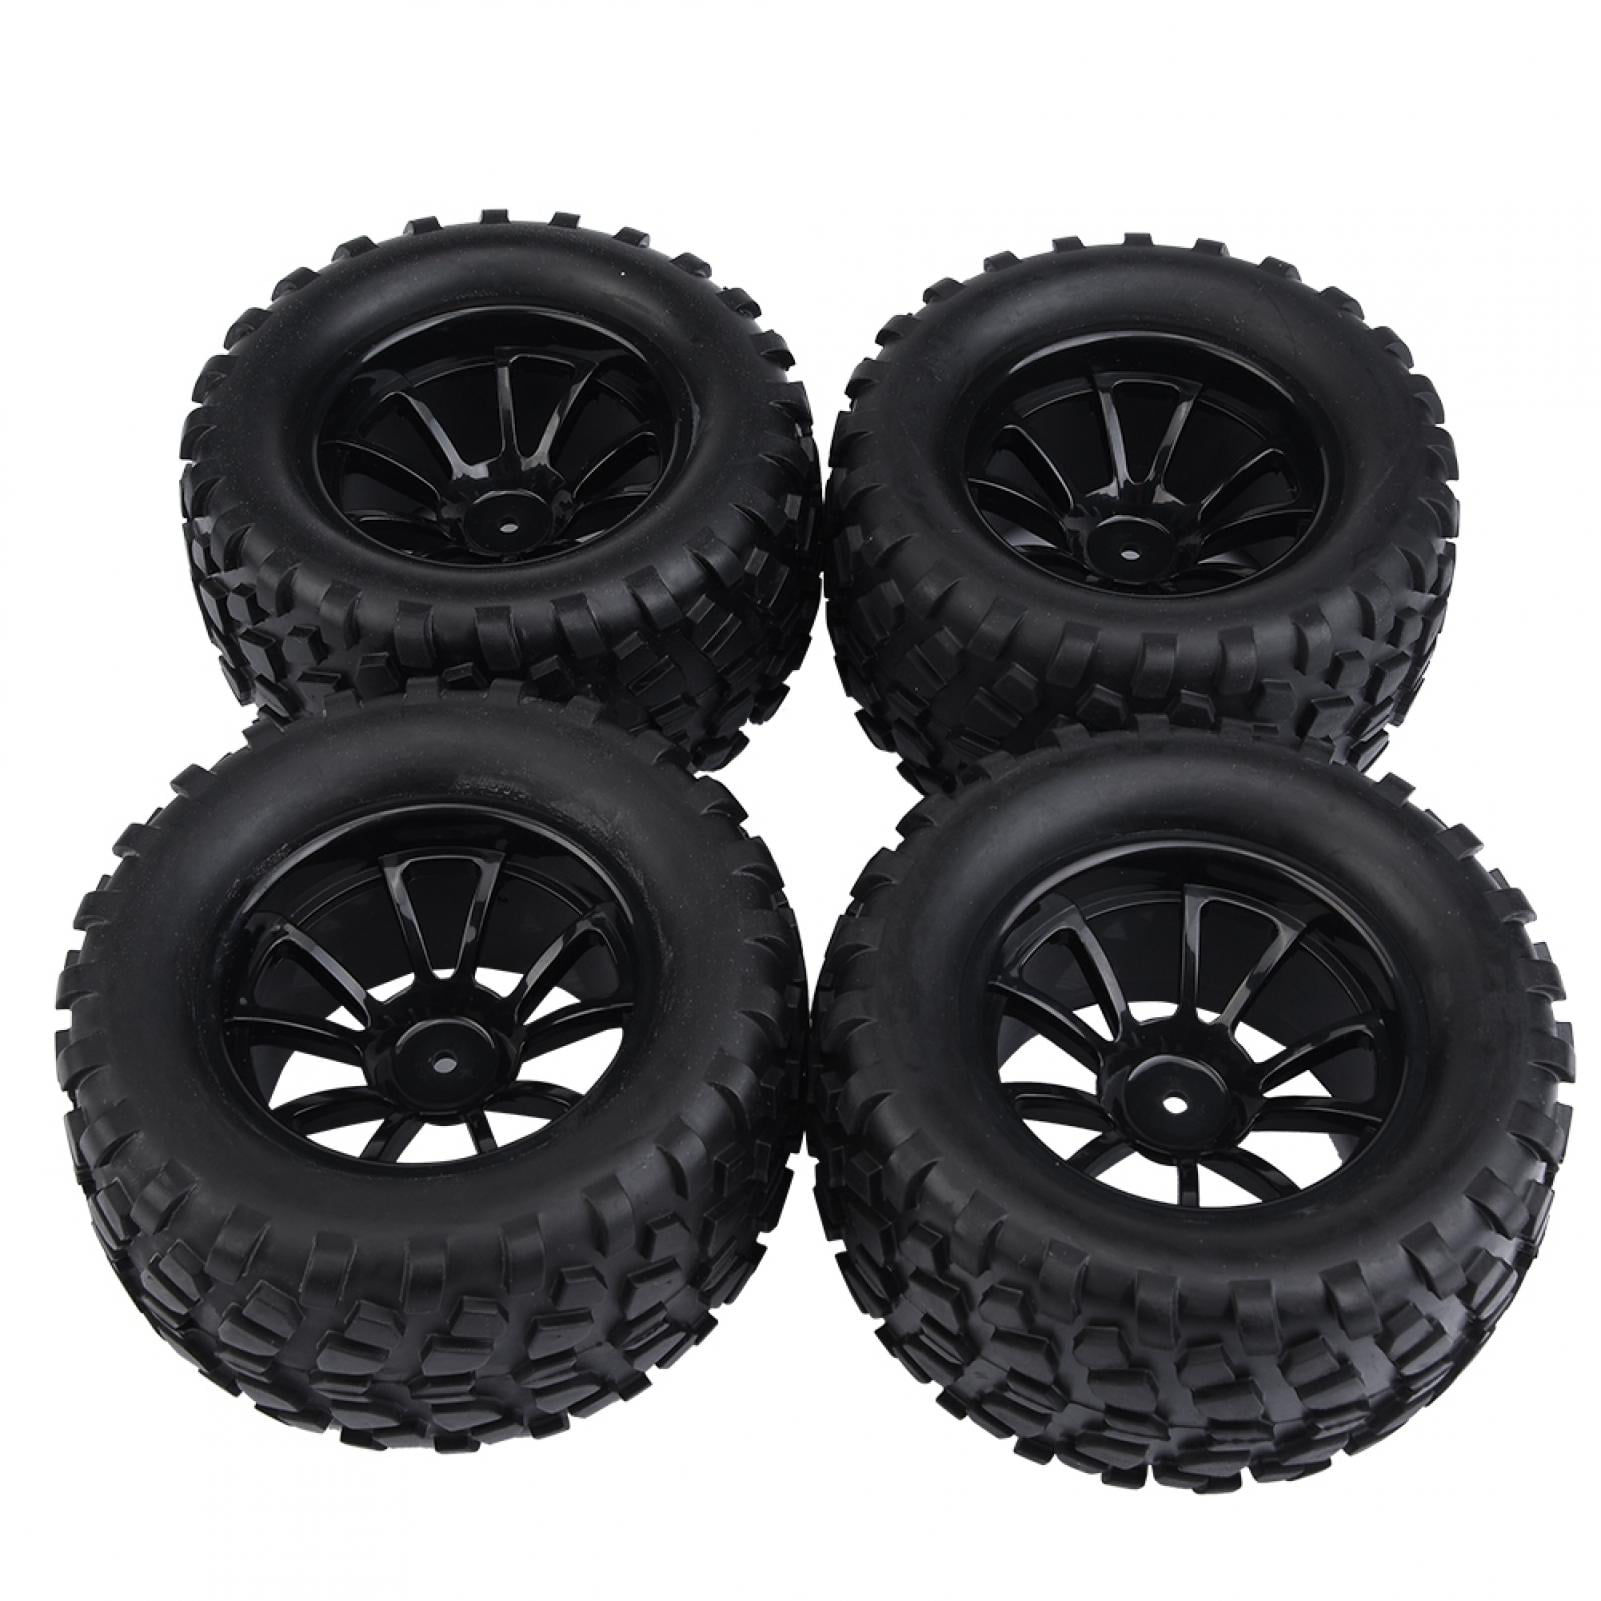 2 units 1.25" Rubber Wheel Tire with Plastic Hub for RC Model Airplane 